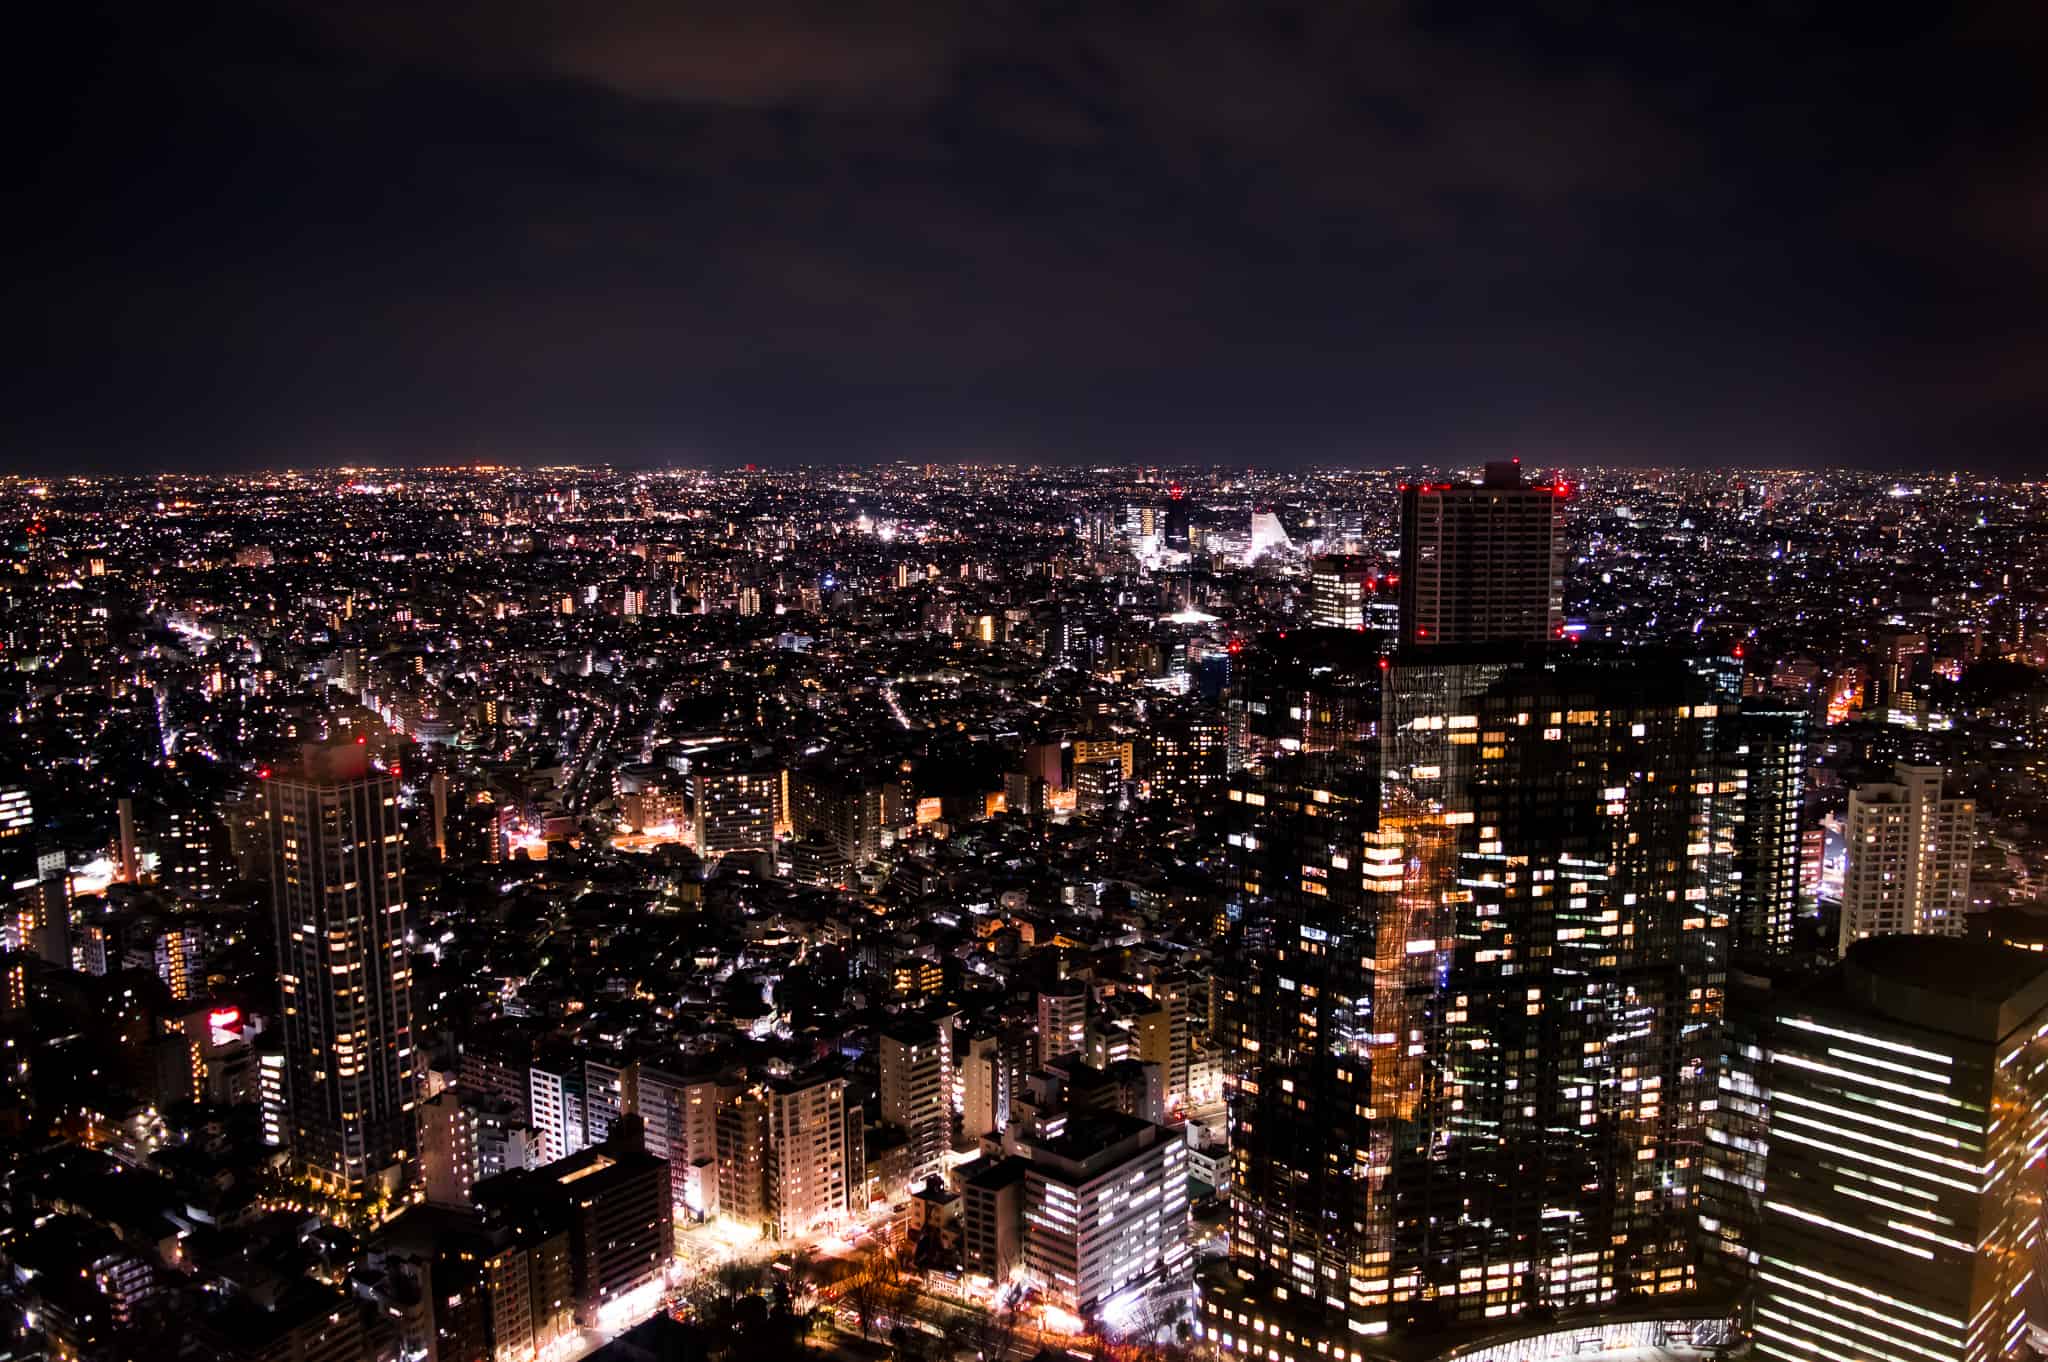 Night sky view from Tokyo Metropolitan Government Building, Japan